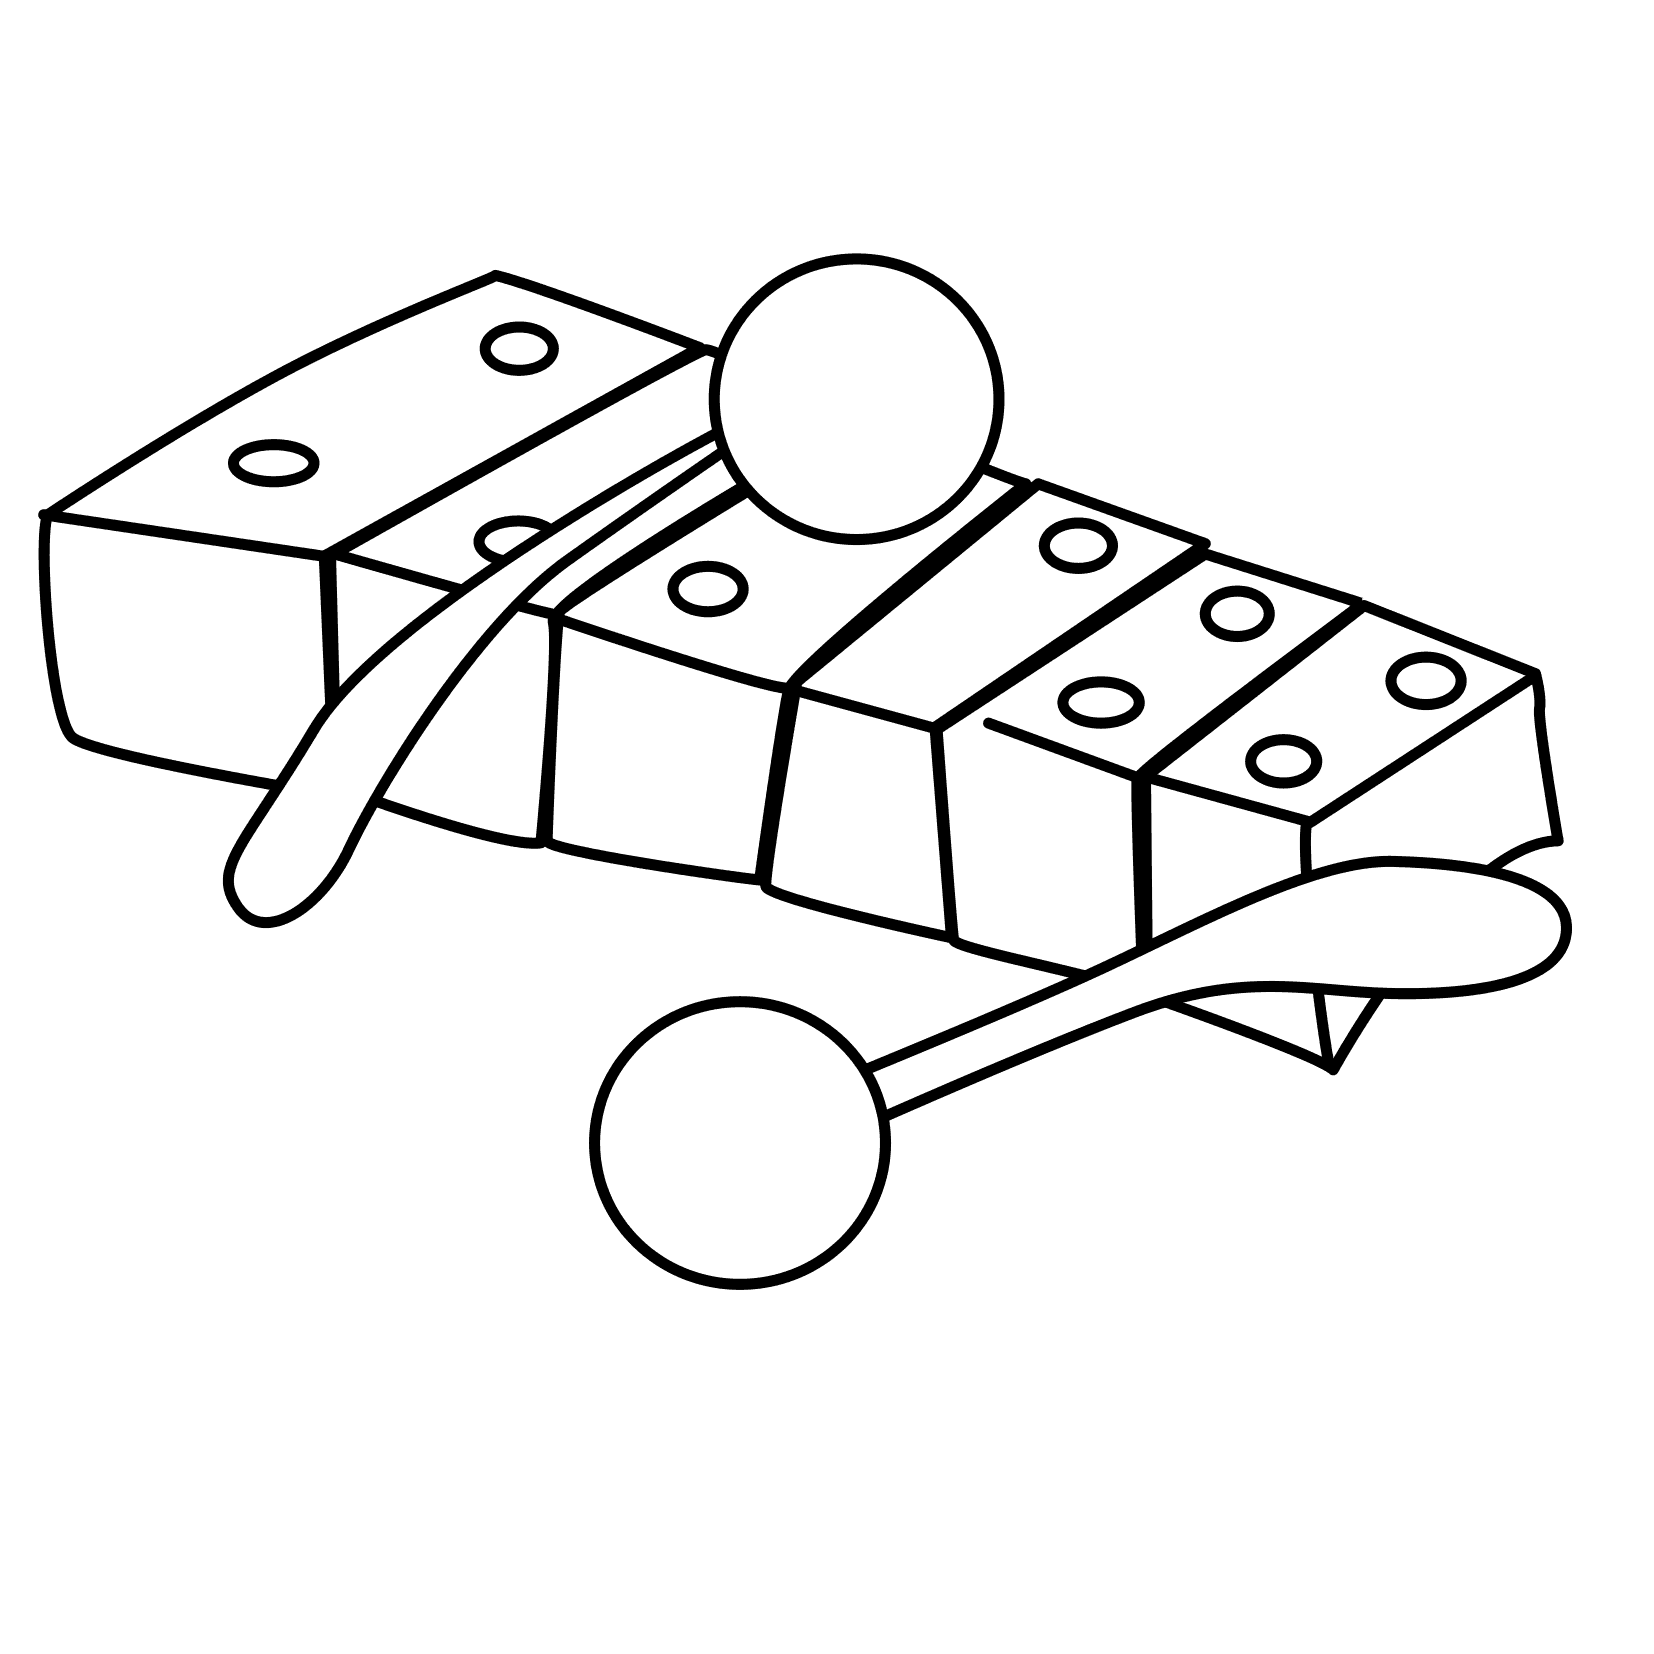 Xylophone Coloring Pages - Kidsuki